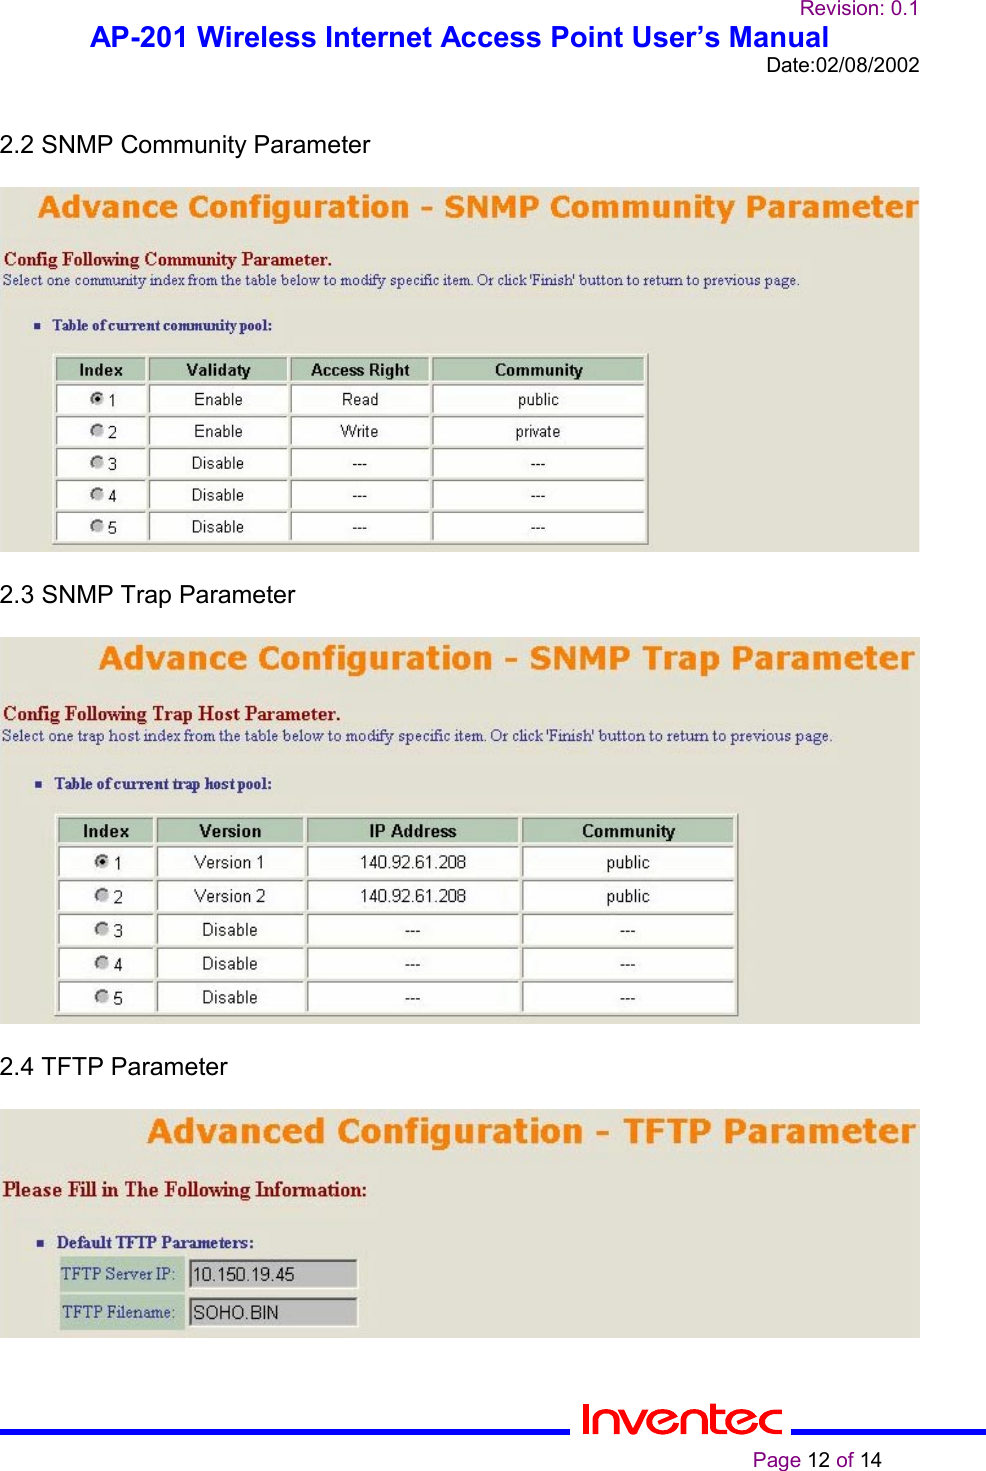 Revision: 0.1AP-201 Wireless Internet Access Point User’s ManualDate:02/08/2002                                                                                                                                                    Page 12 of 142.2 SNMP Community Parameter2.3 SNMP Trap Parameter2.4 TFTP Parameter